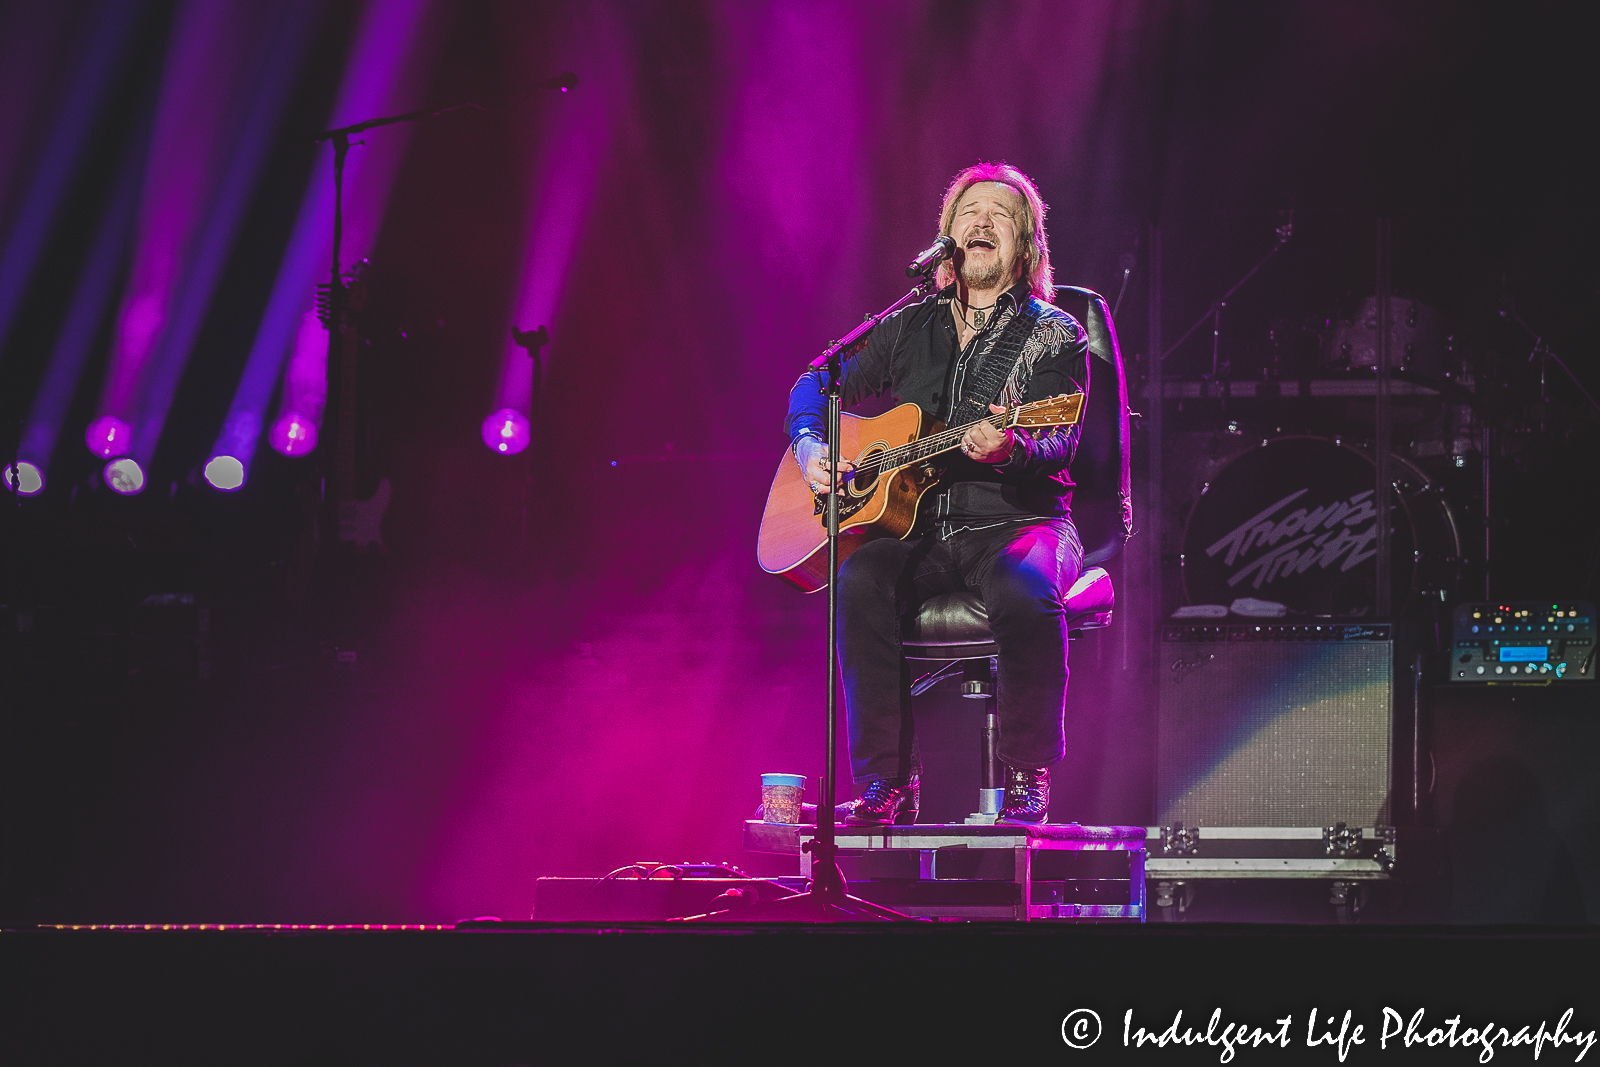 Travis in the solo acoustic portion of his set at Star Pavilion inside of Ameristar Casino in Kansas City, MO on December 10, 2022.